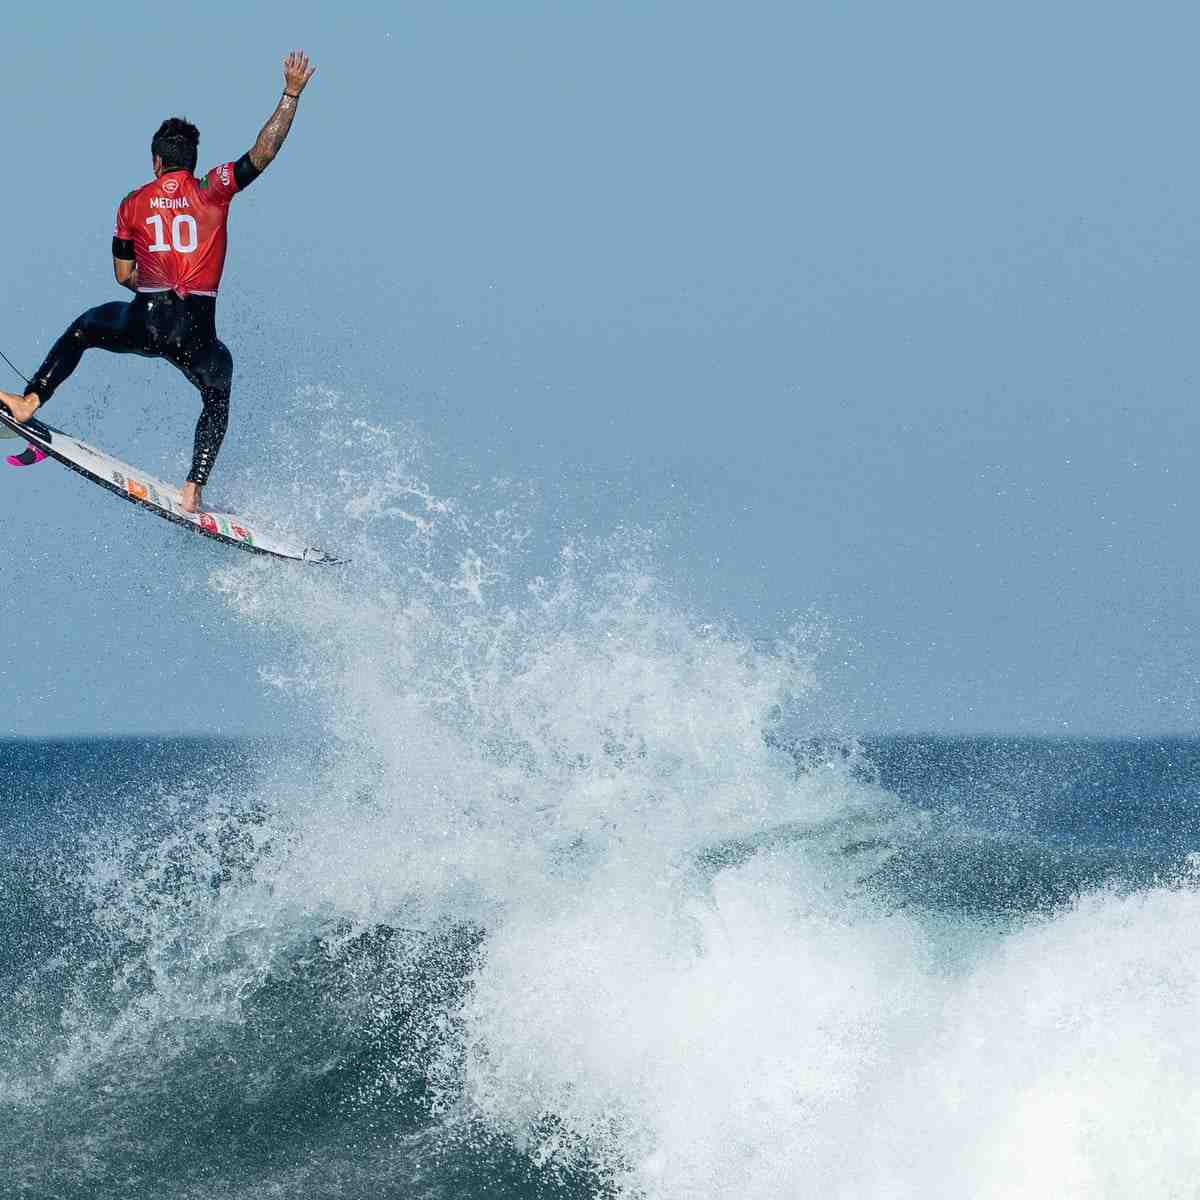 Who is the best surfer in the world?